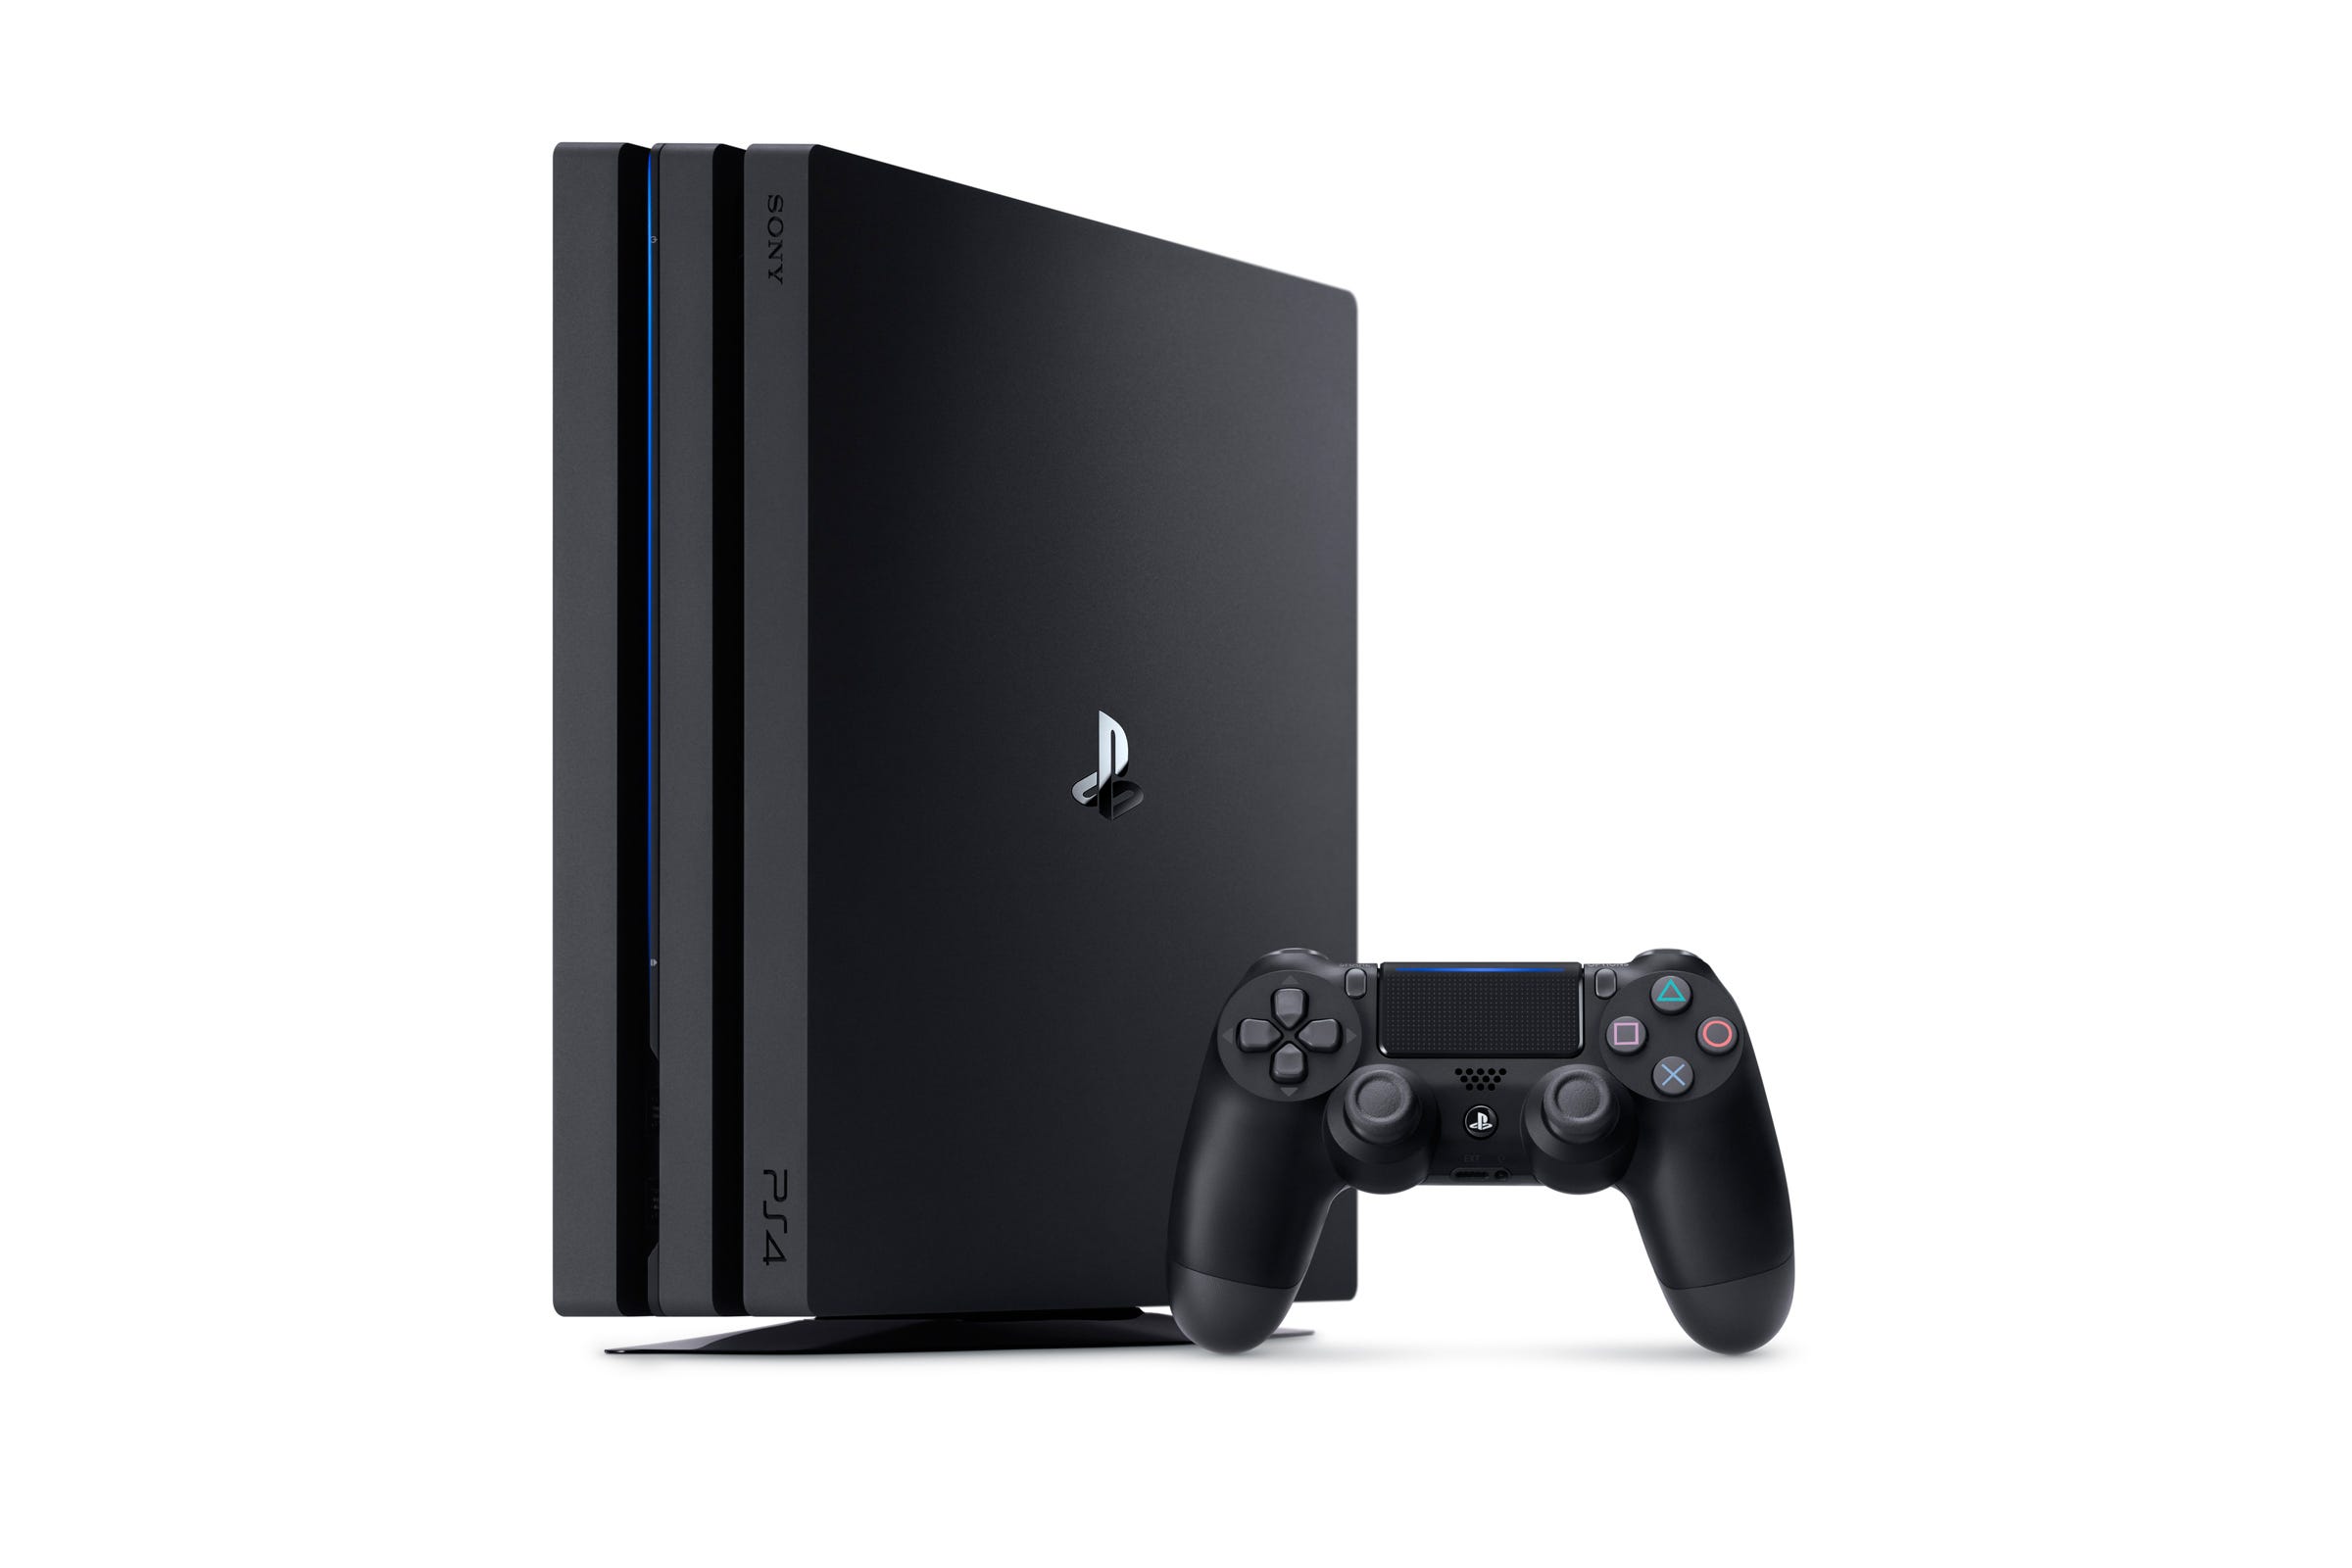 PlayStation 4 Pro is all about 4K TV